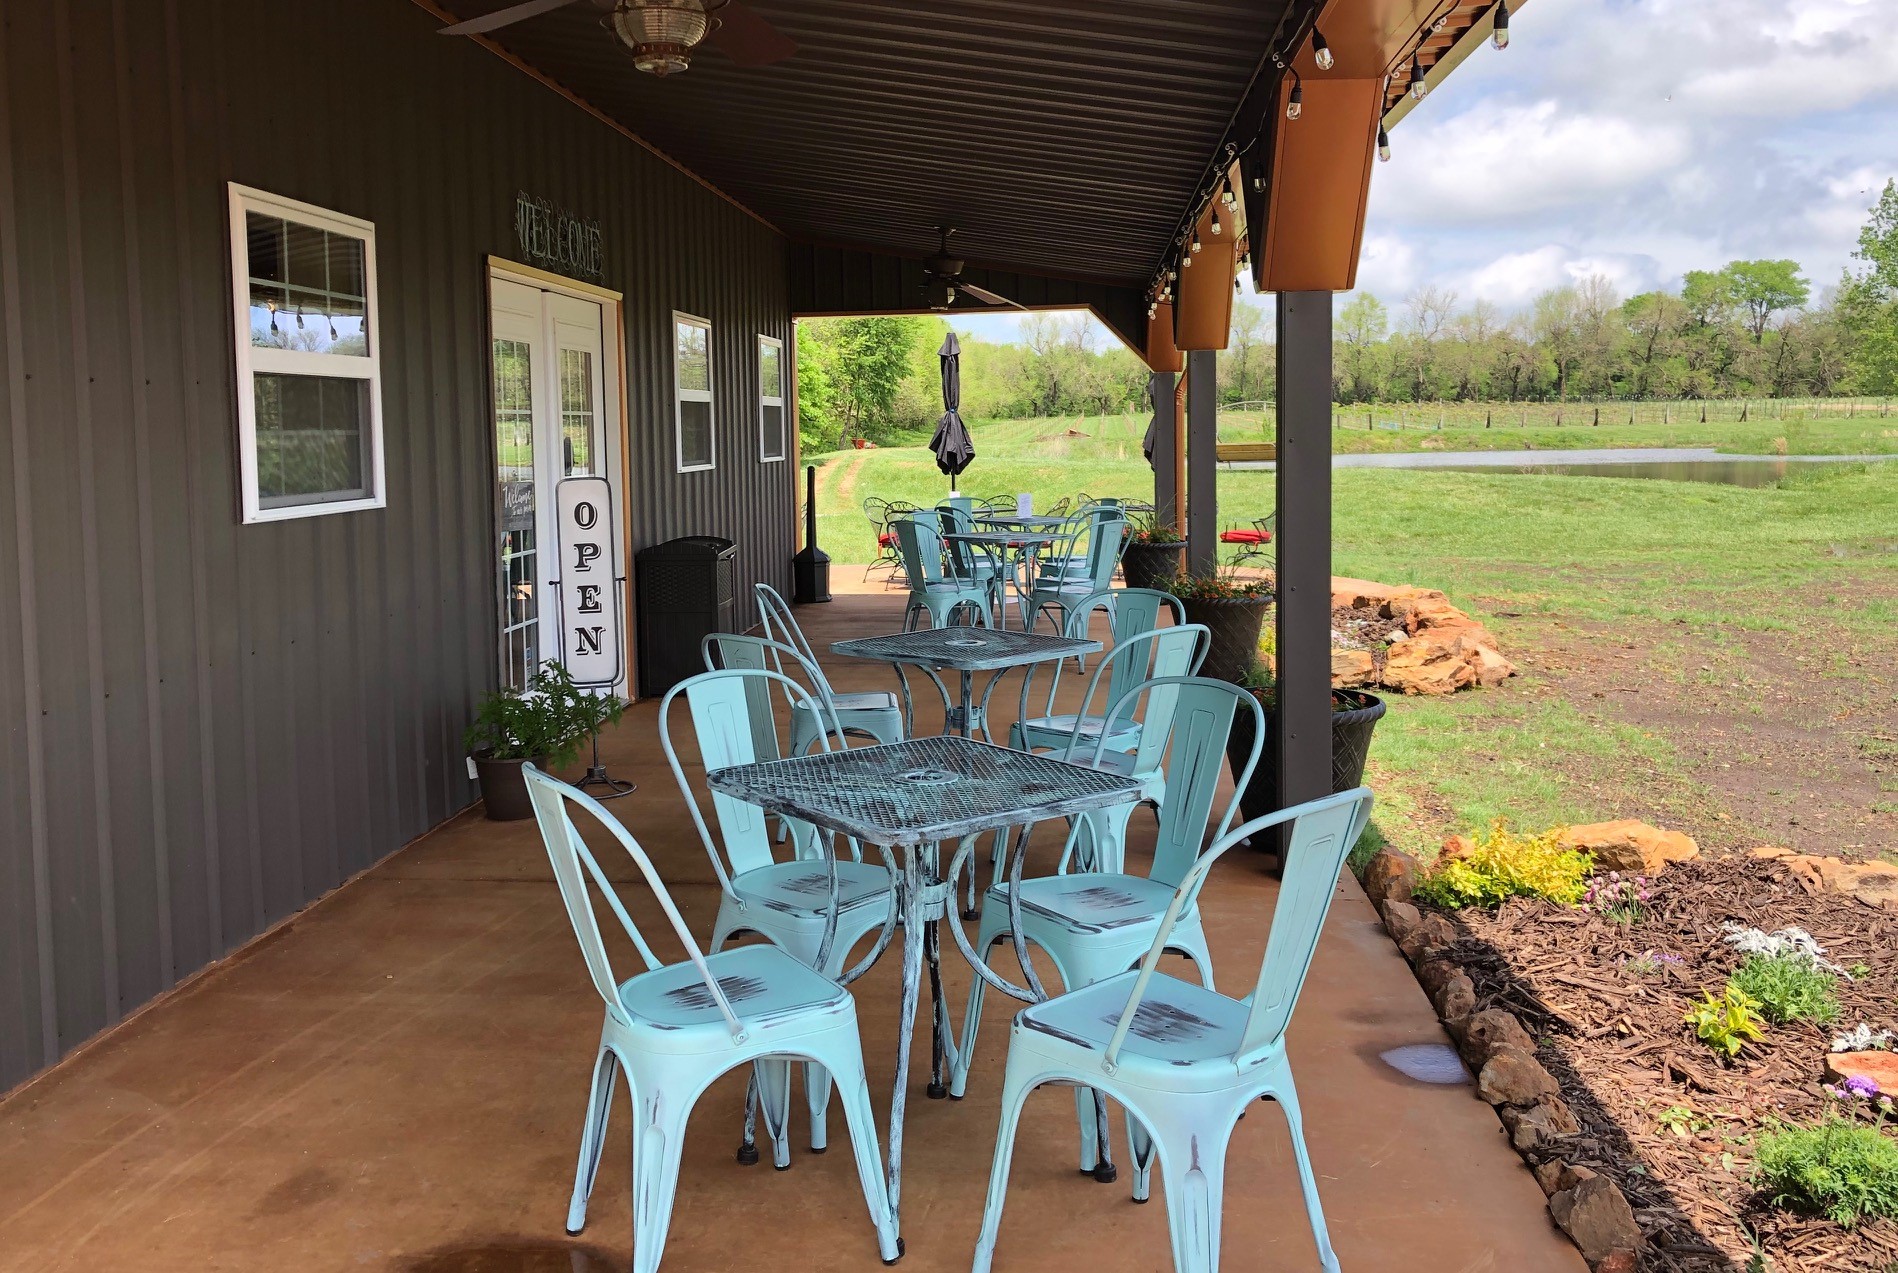 Christine's Vineyard - outdoor photo of a porch with various tables and chairs available for seating, during the day.